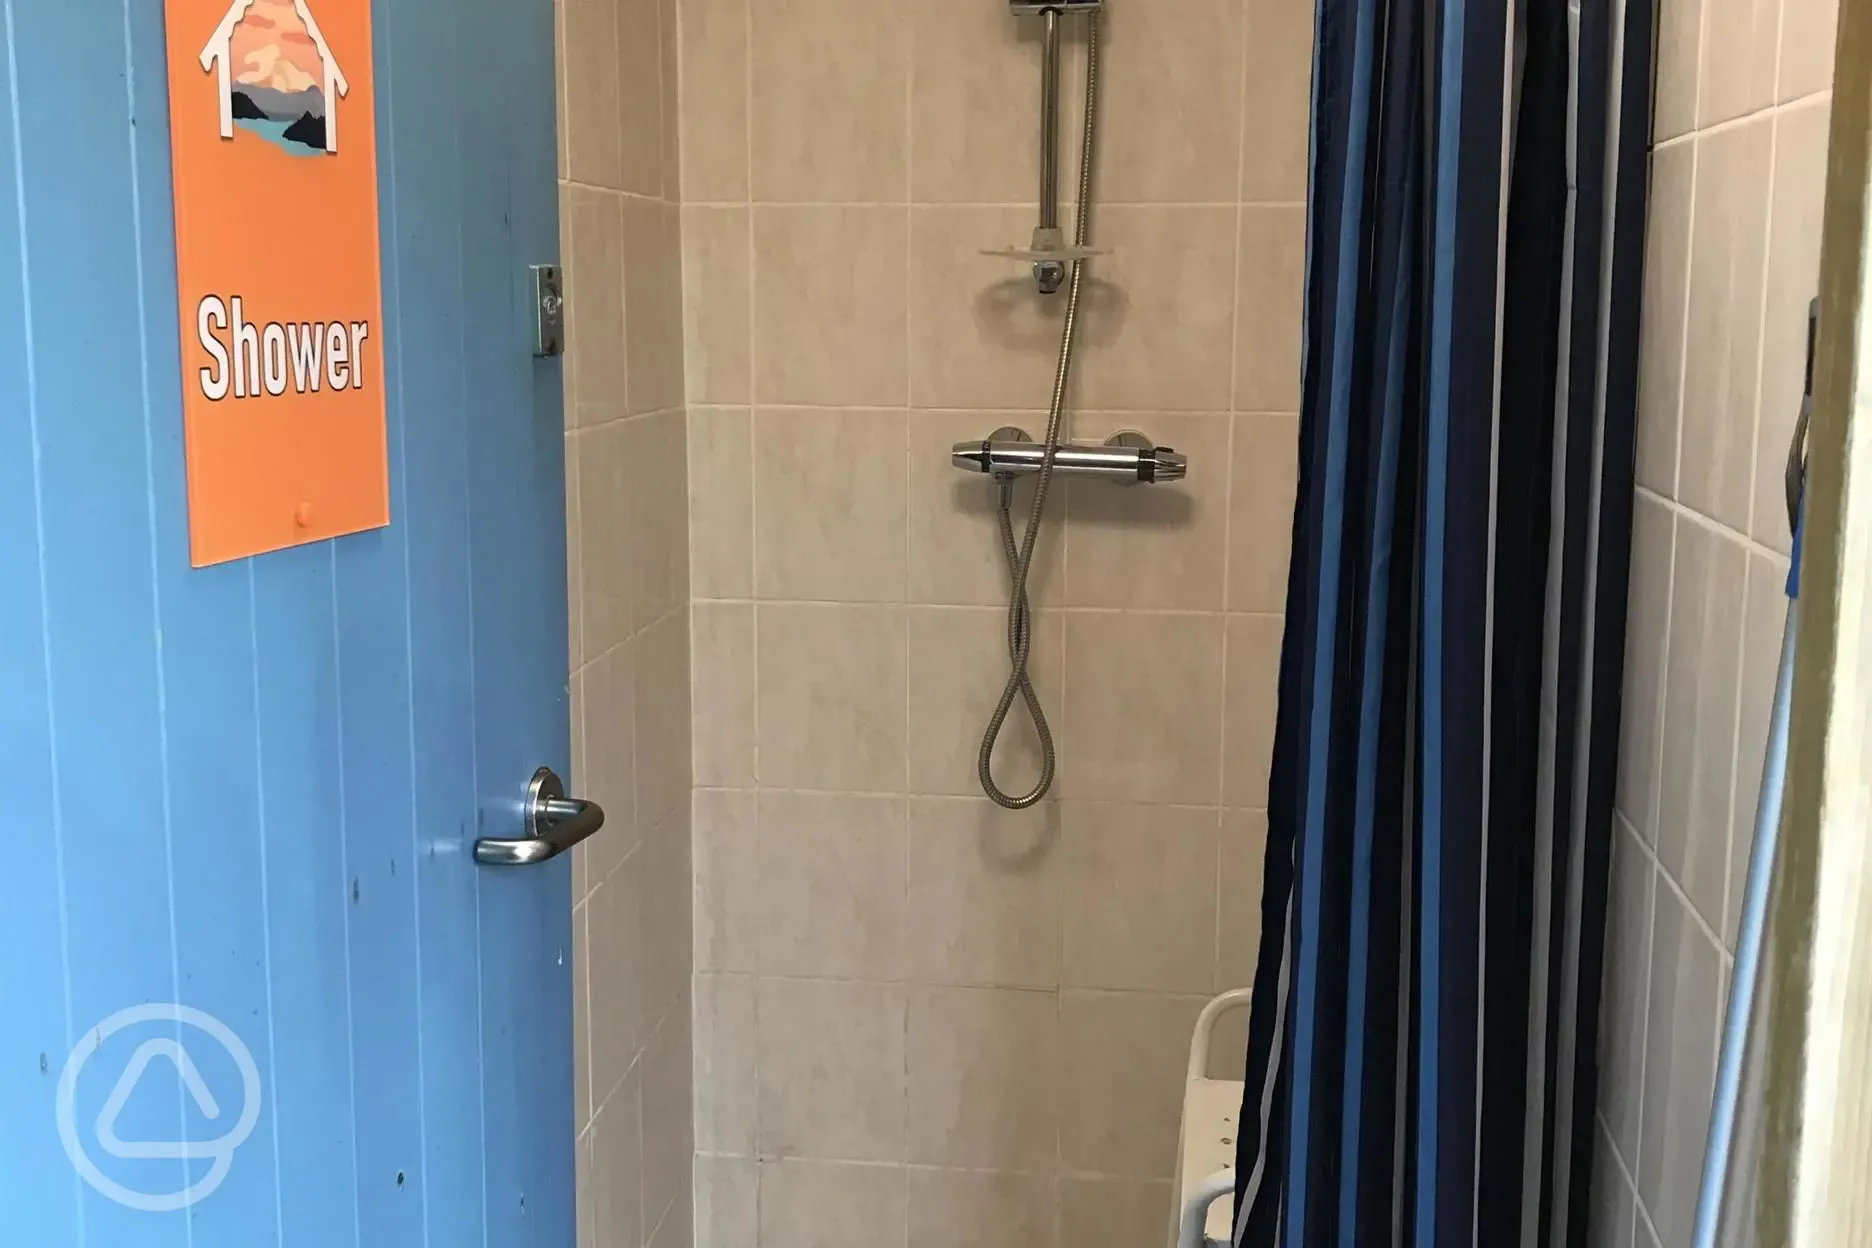 One of the two shared showers